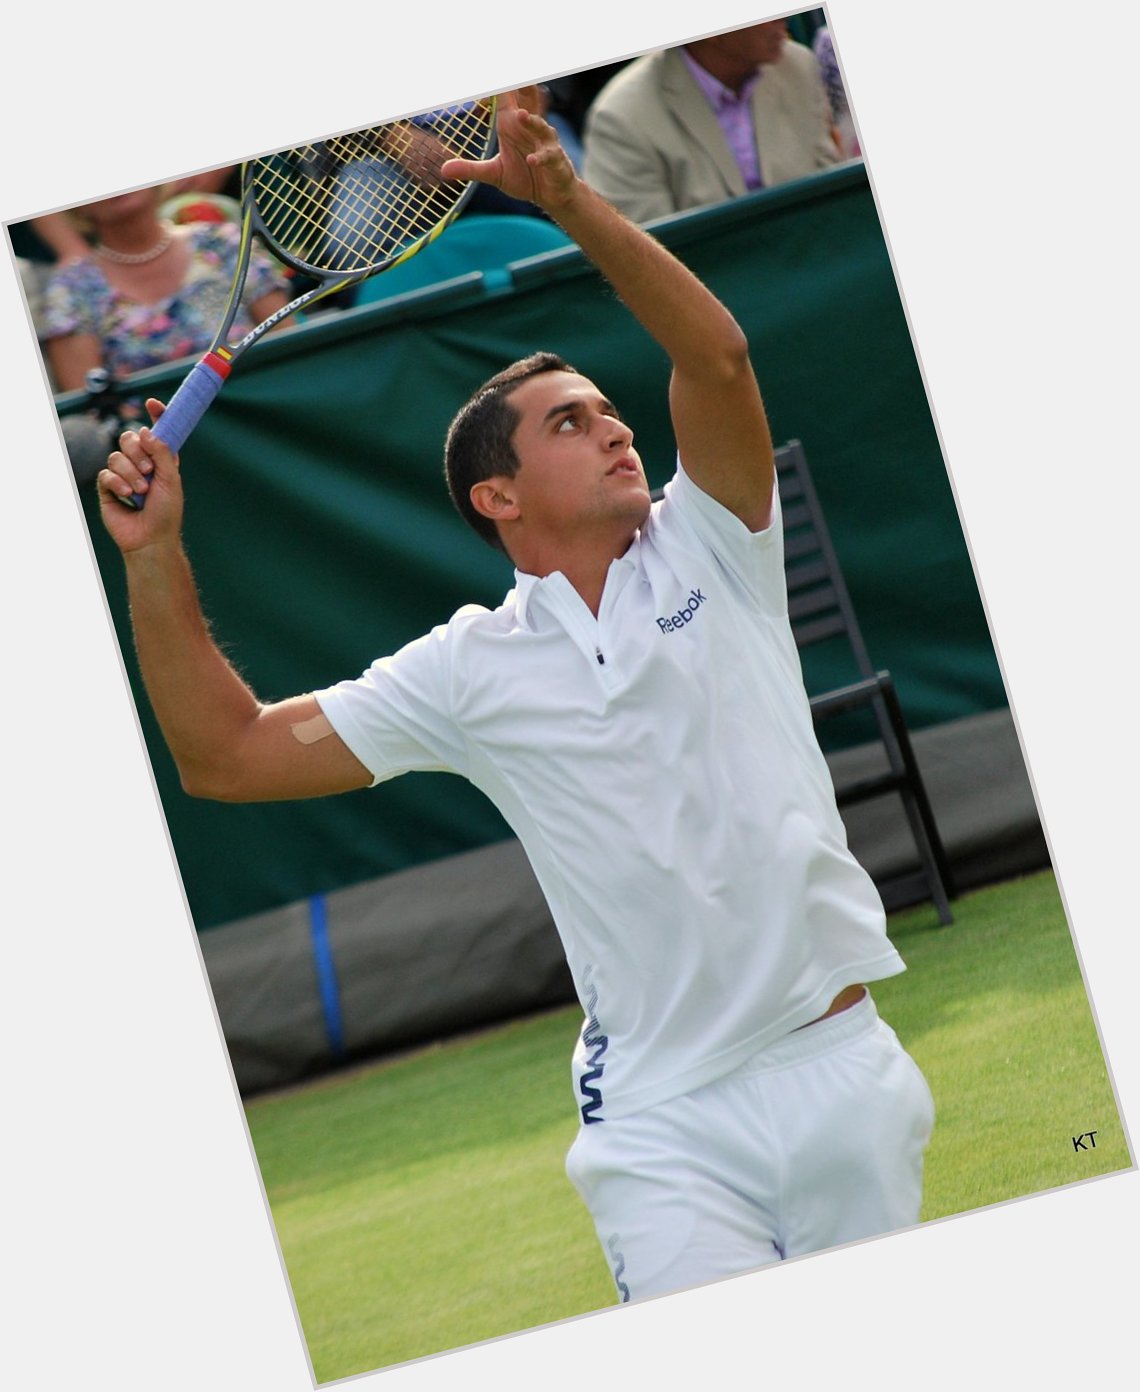 Happy Birthday Nicolas Almagro! The Spanish standout was born on this date: August 21, 1985 